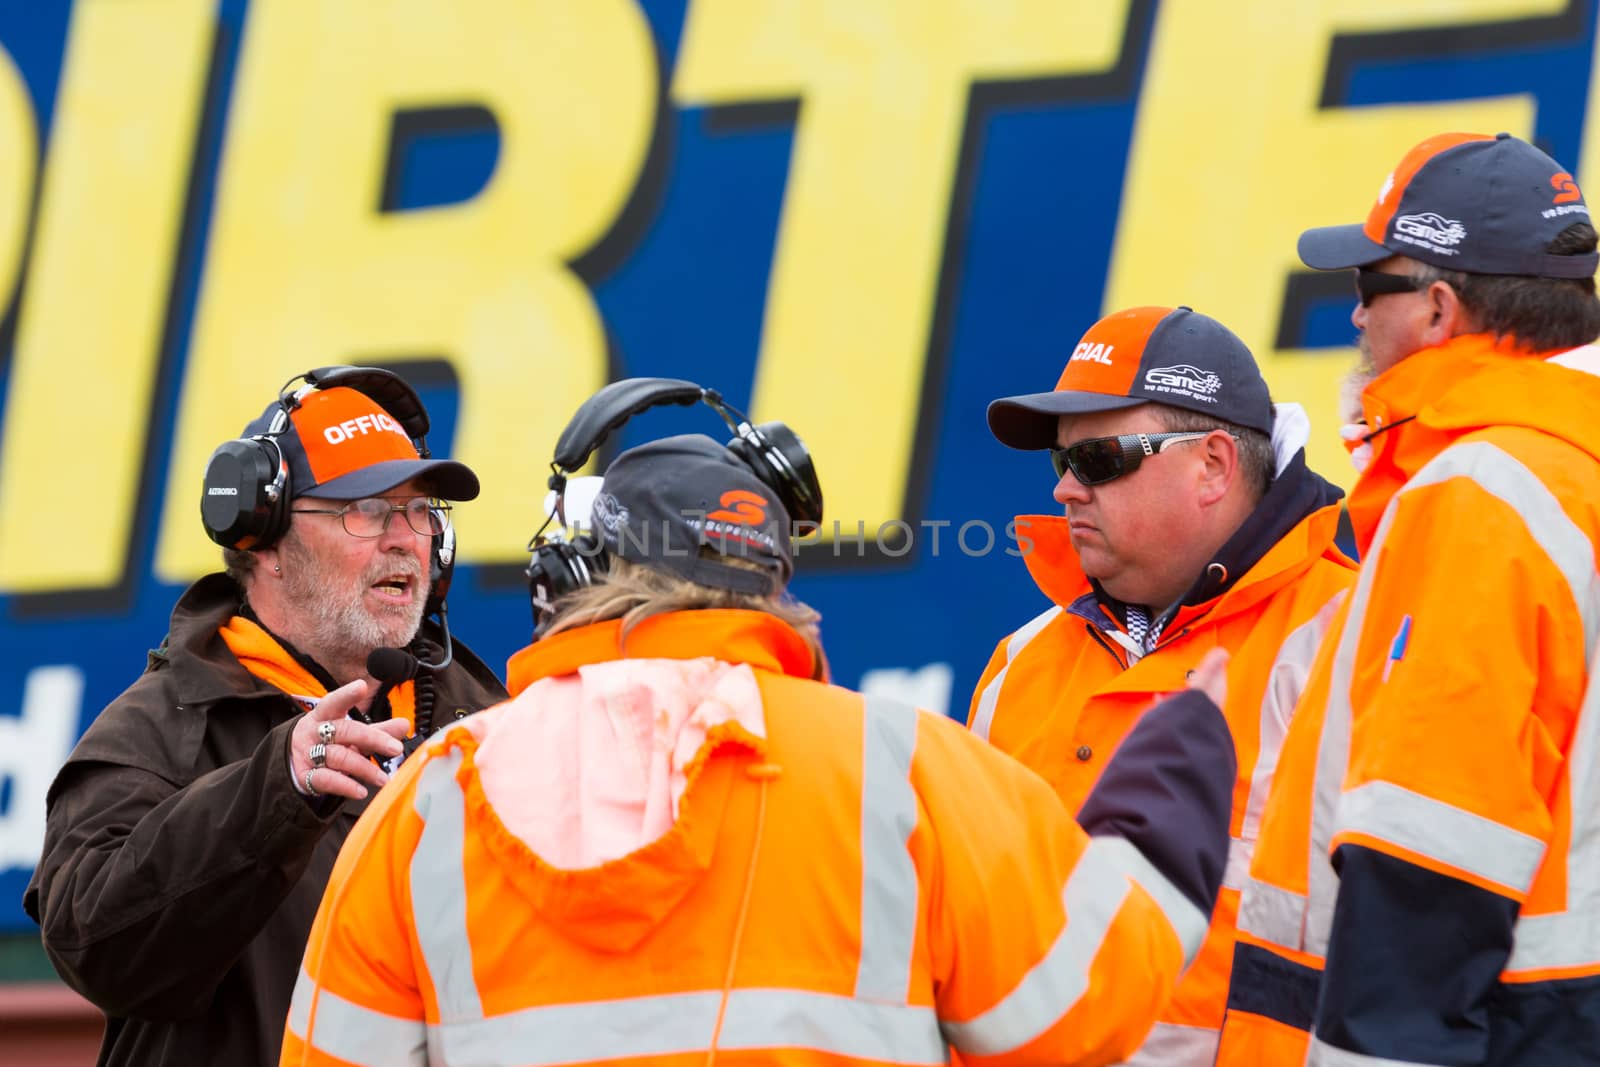 MELBOURNE/AUSTRALIA - SEPTEMBER 17, 2016: Race officials being briefed before the race at the Wilson Security Sandown 500 'Retro' Endurance race at Sandown raceway.